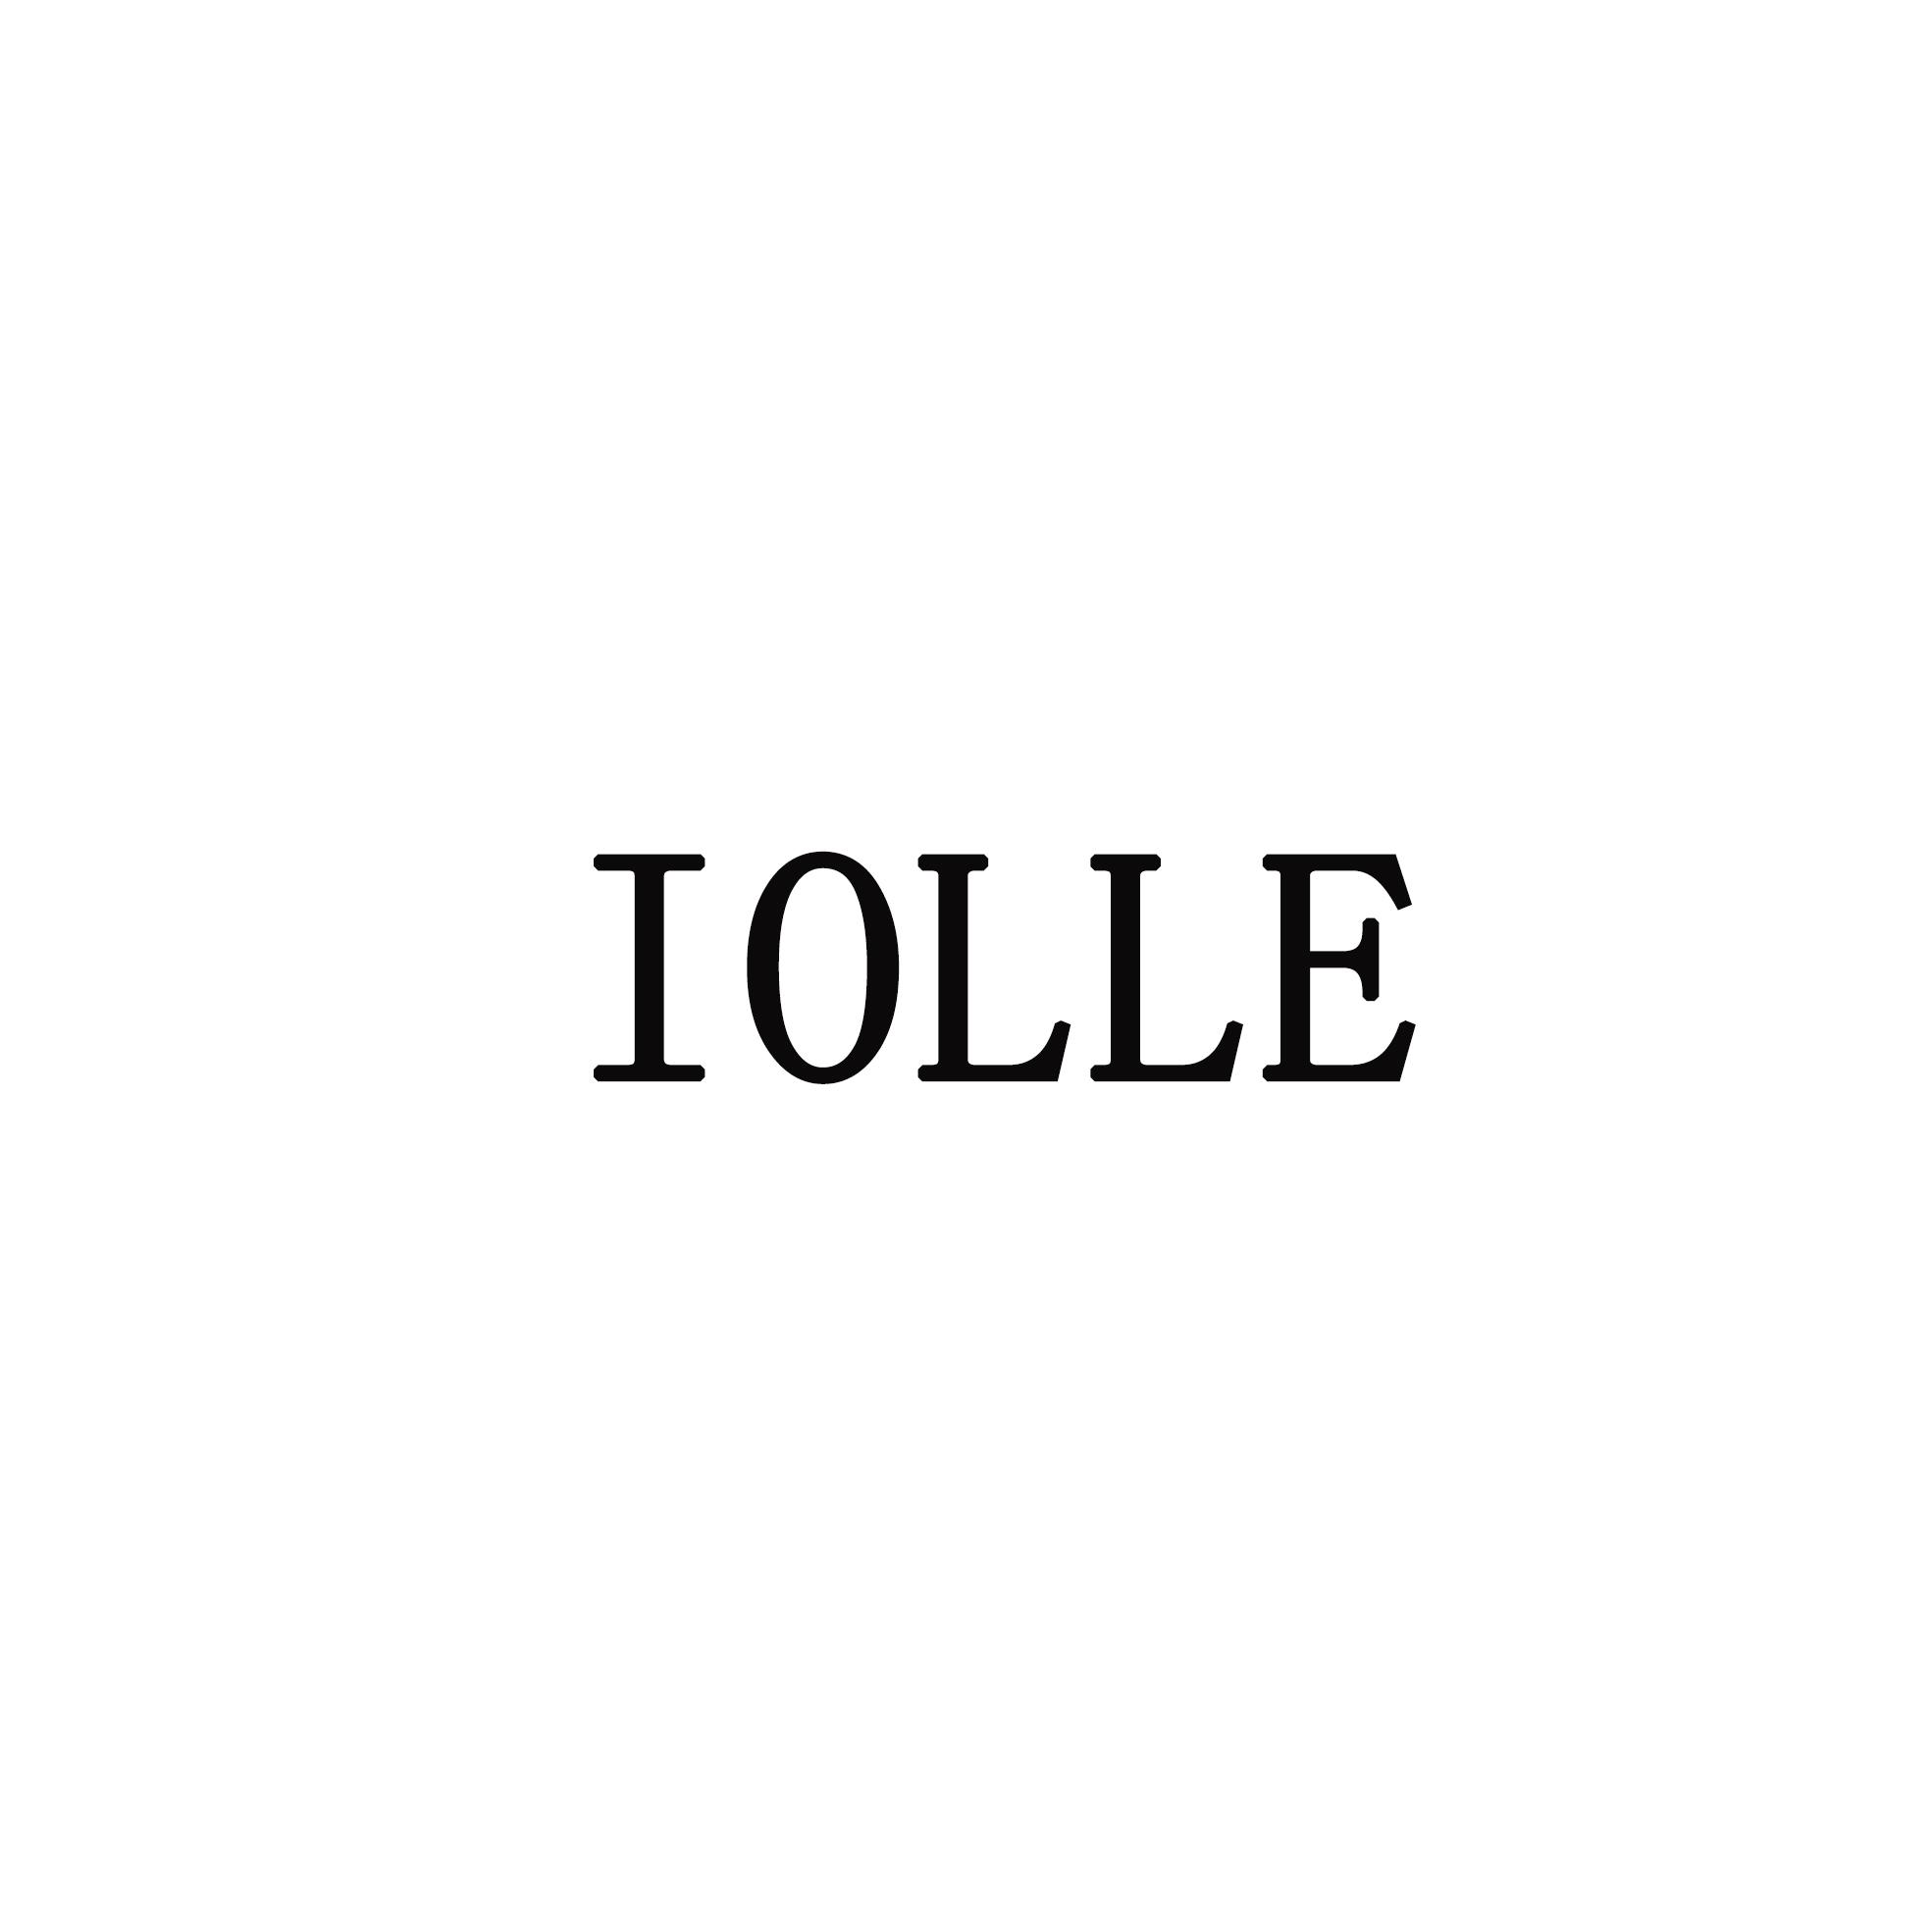 IOLLE